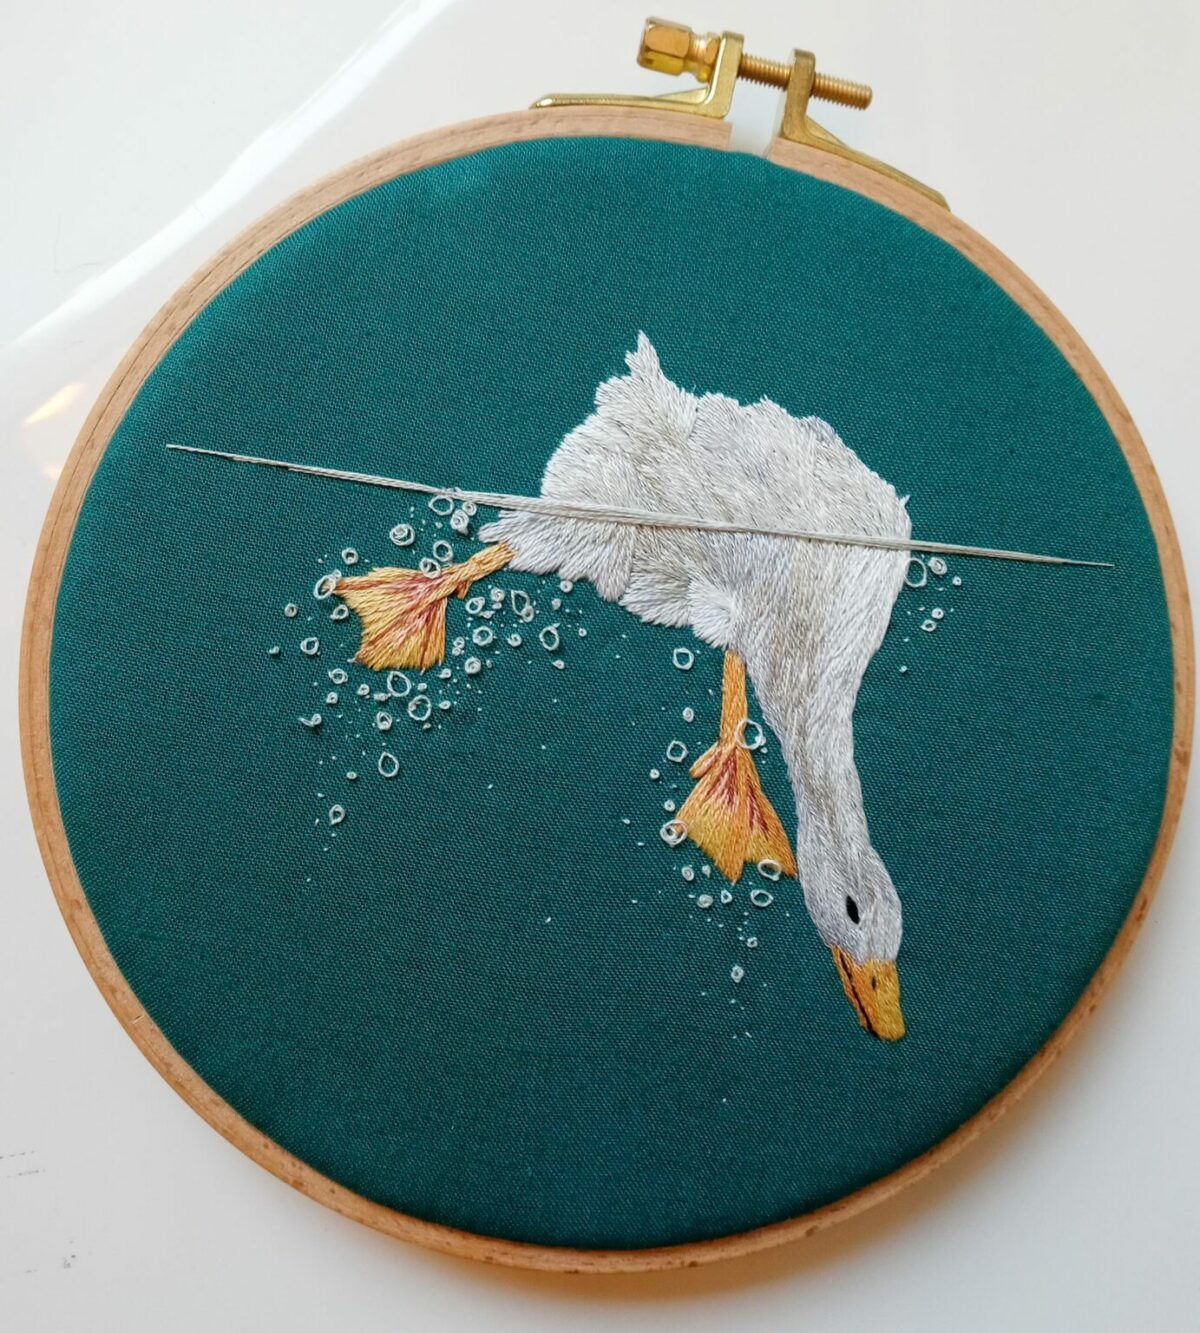 Gorgeous Embroideries Of Animals Plunging Into The Waters By Megan Zaniewski 10